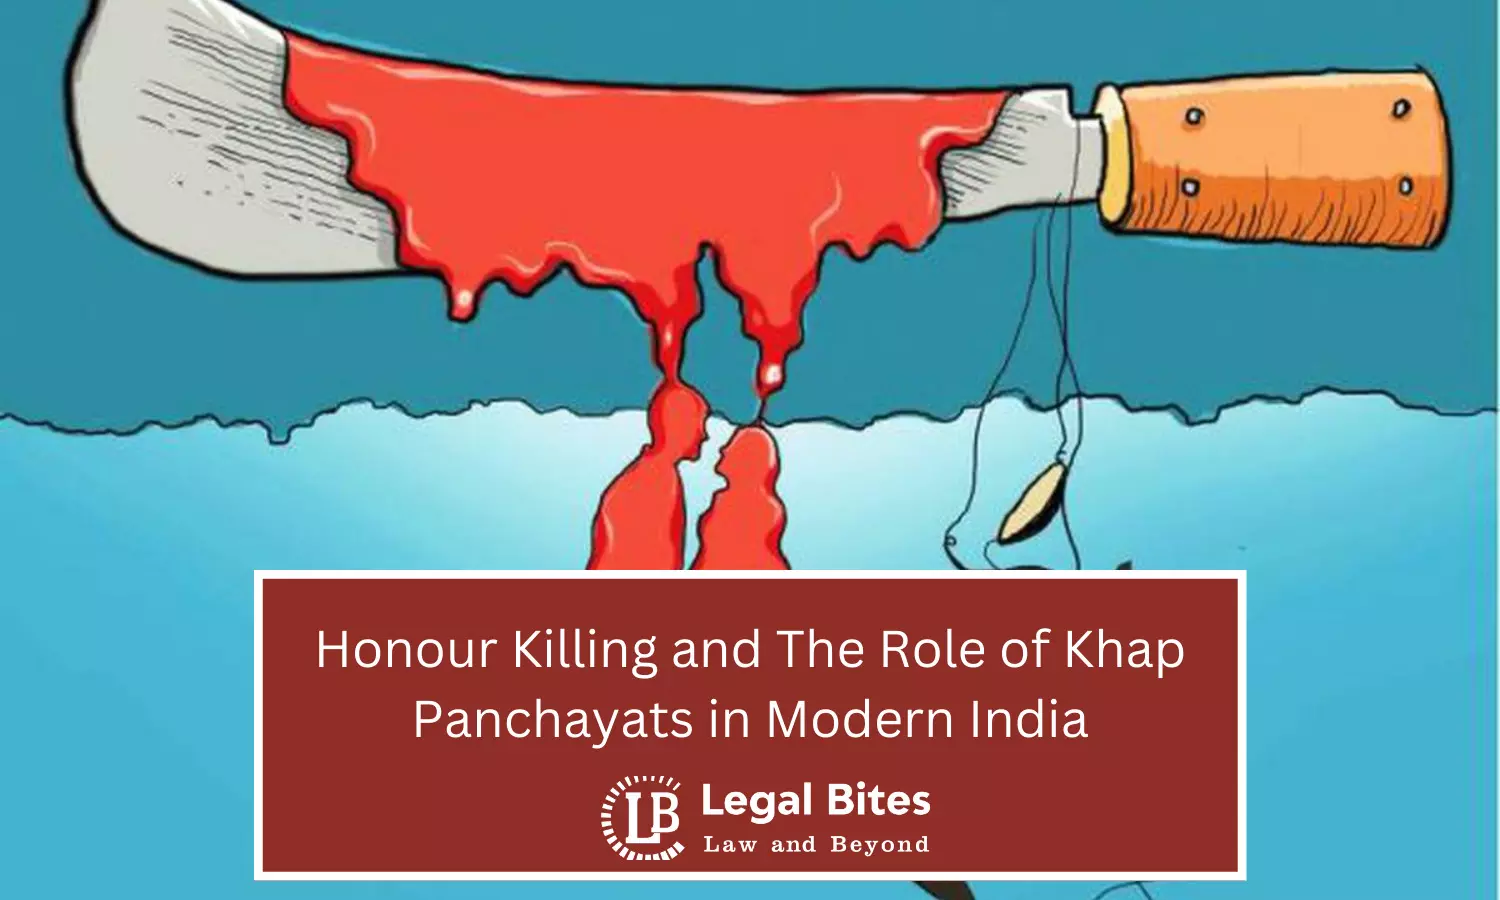 Honour Killing and the Role of Khap Panchayats in Modern India